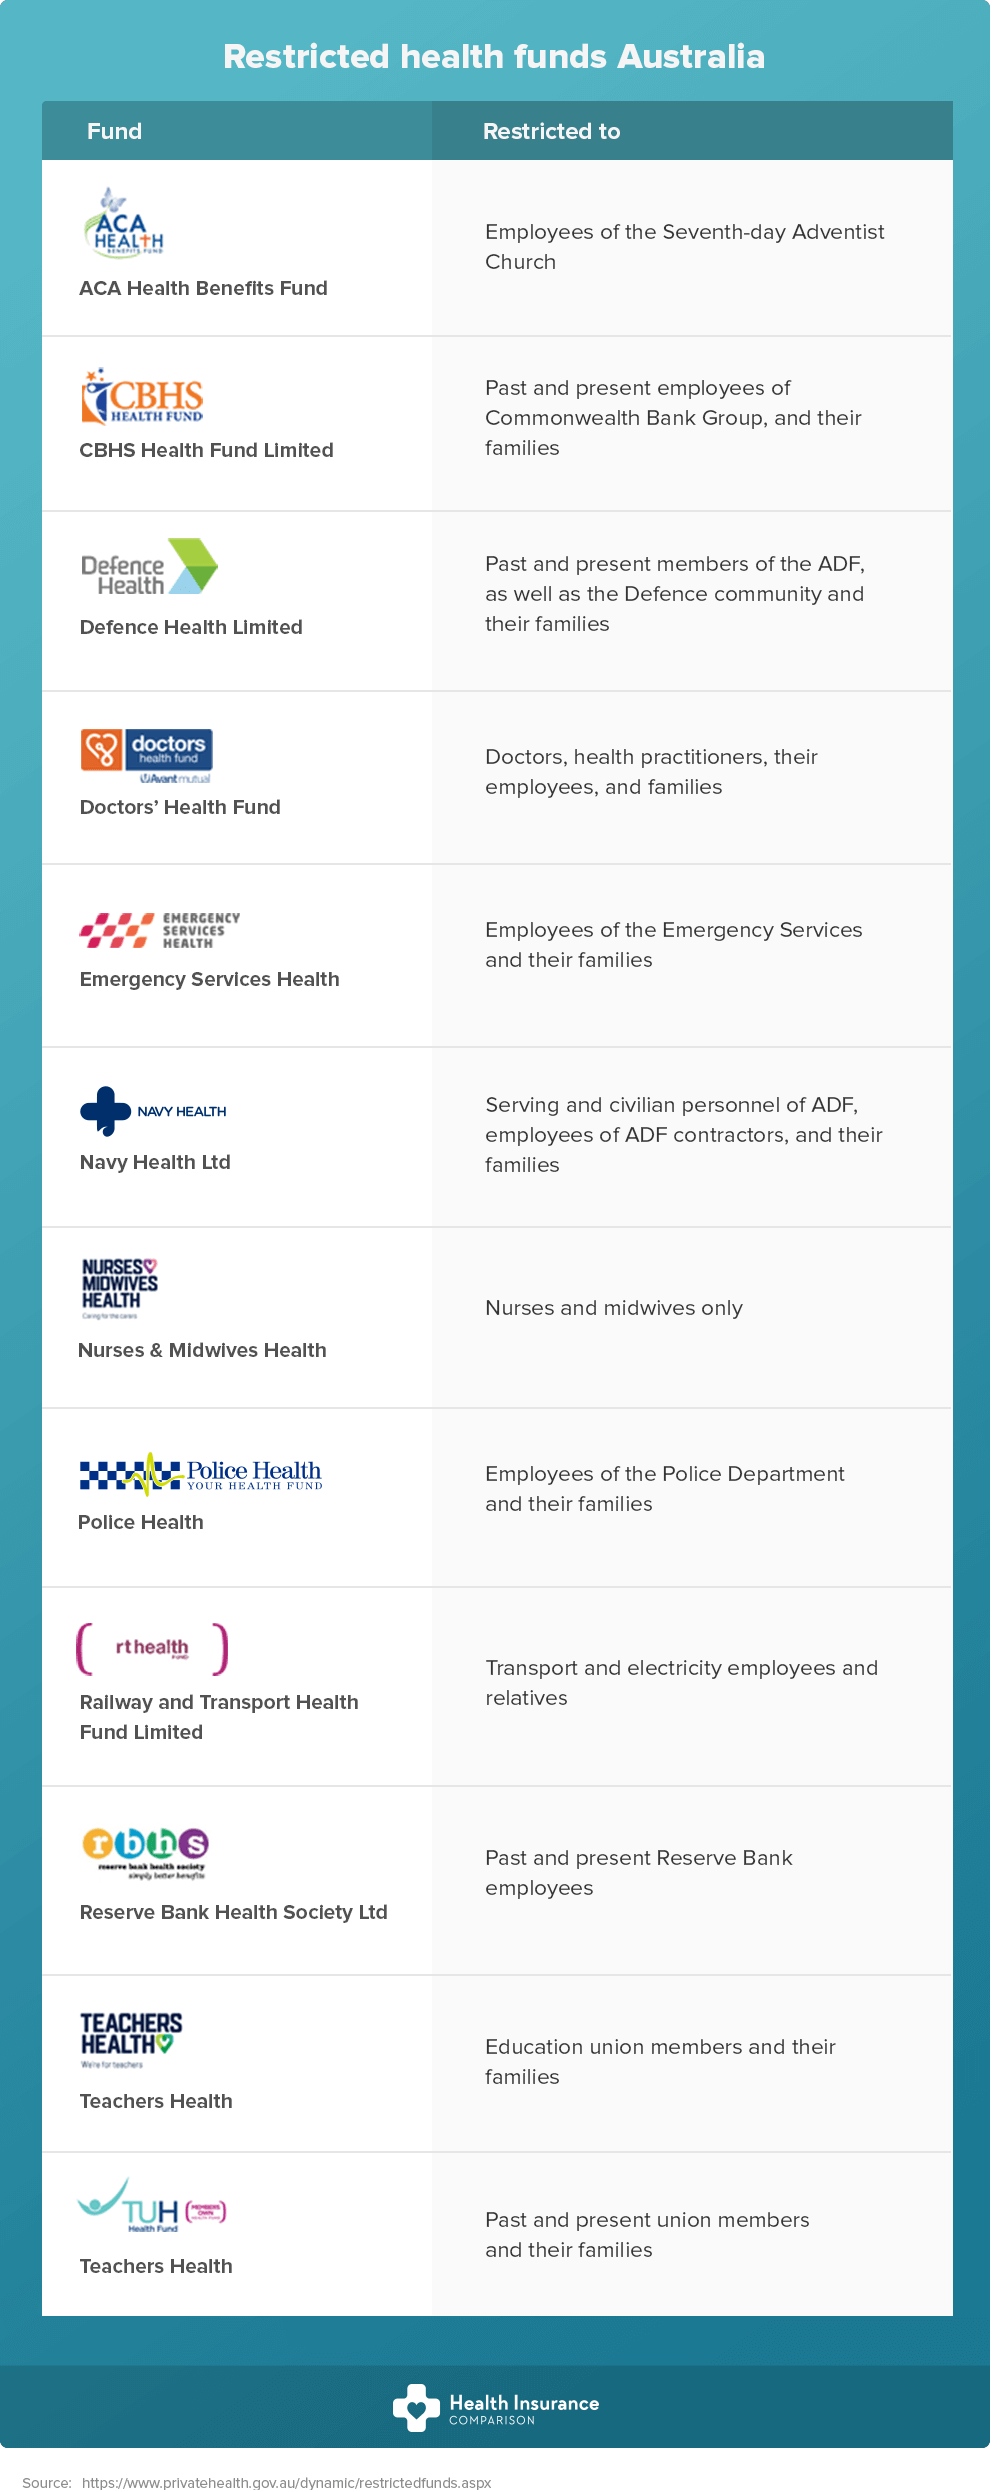 List of restricted health funds in Australia